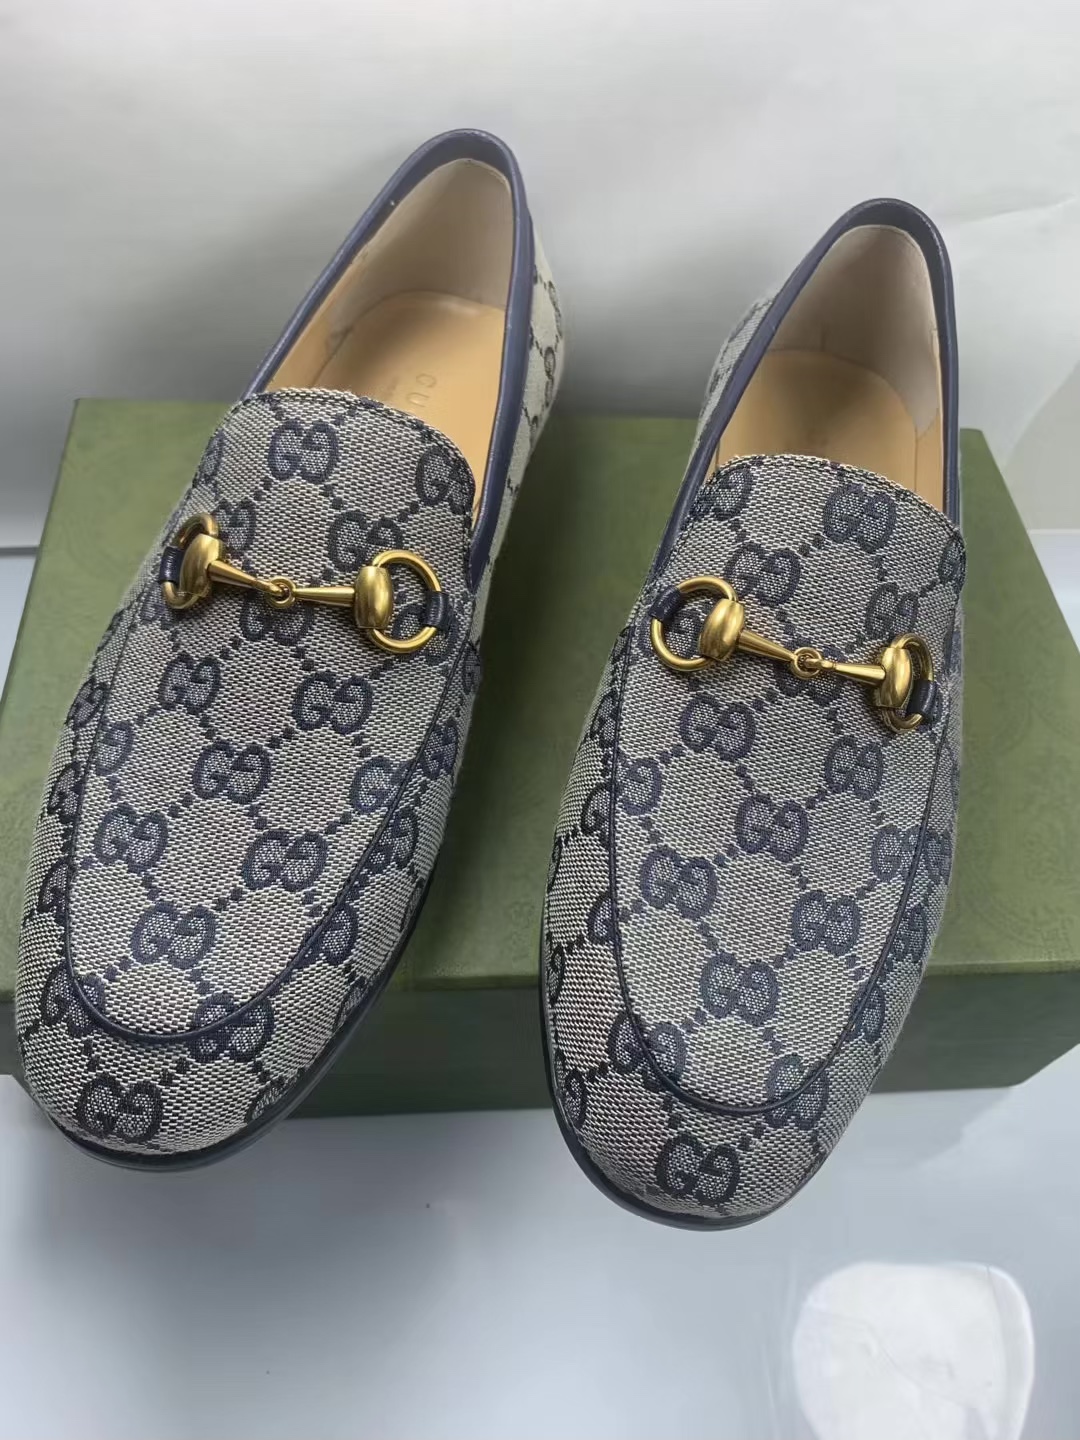 Gucci Horsebit Loafer Unisex # 264754, cheap Gucci Dress Shoes, only $89!